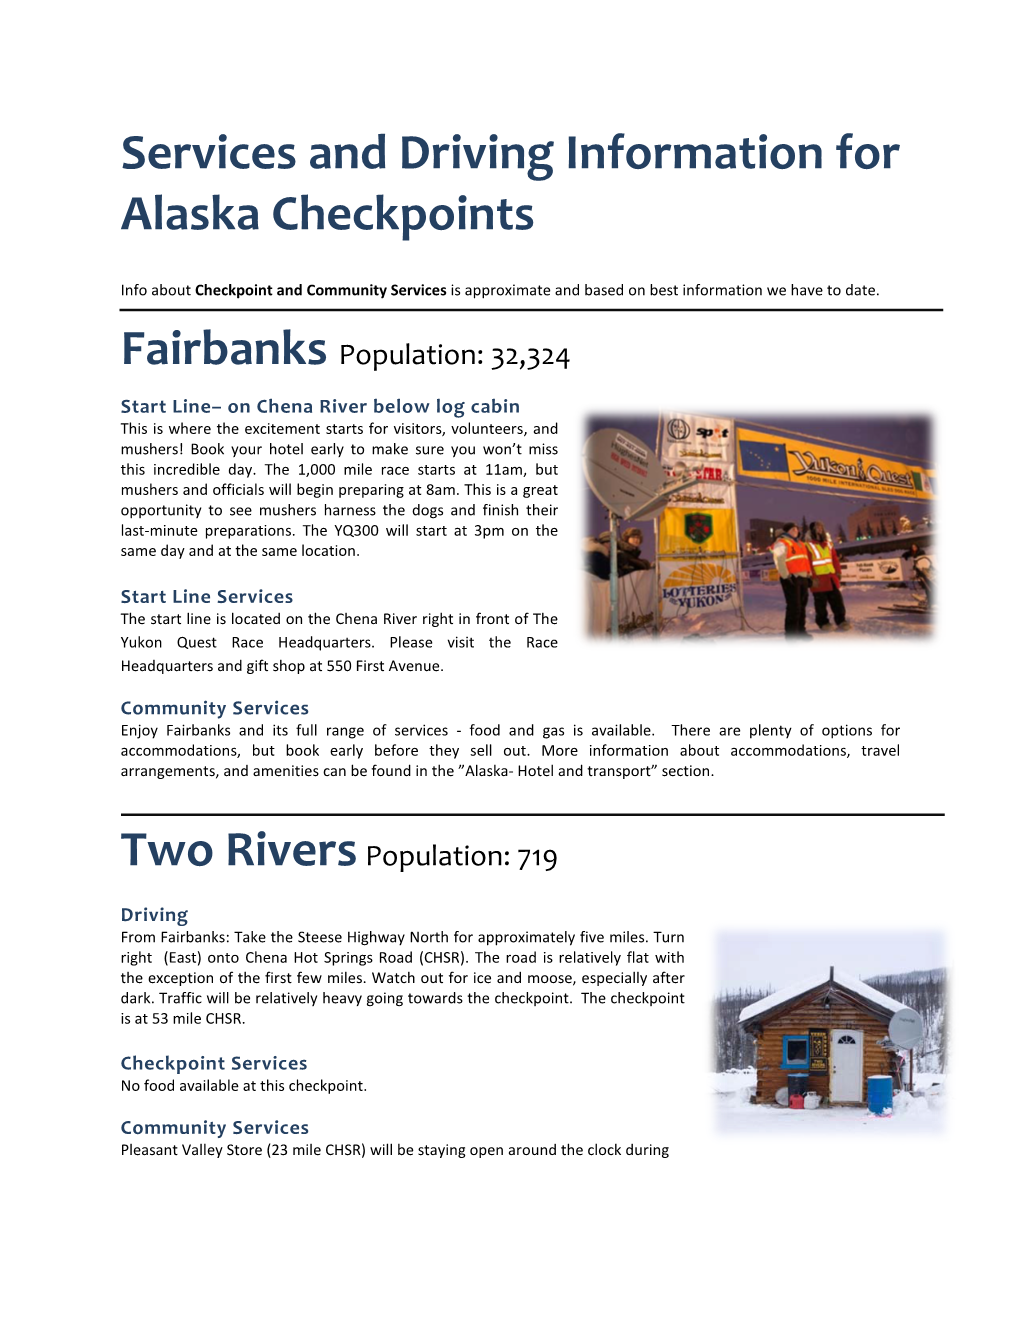 Services and Driving Information for Alaska Checkpoints